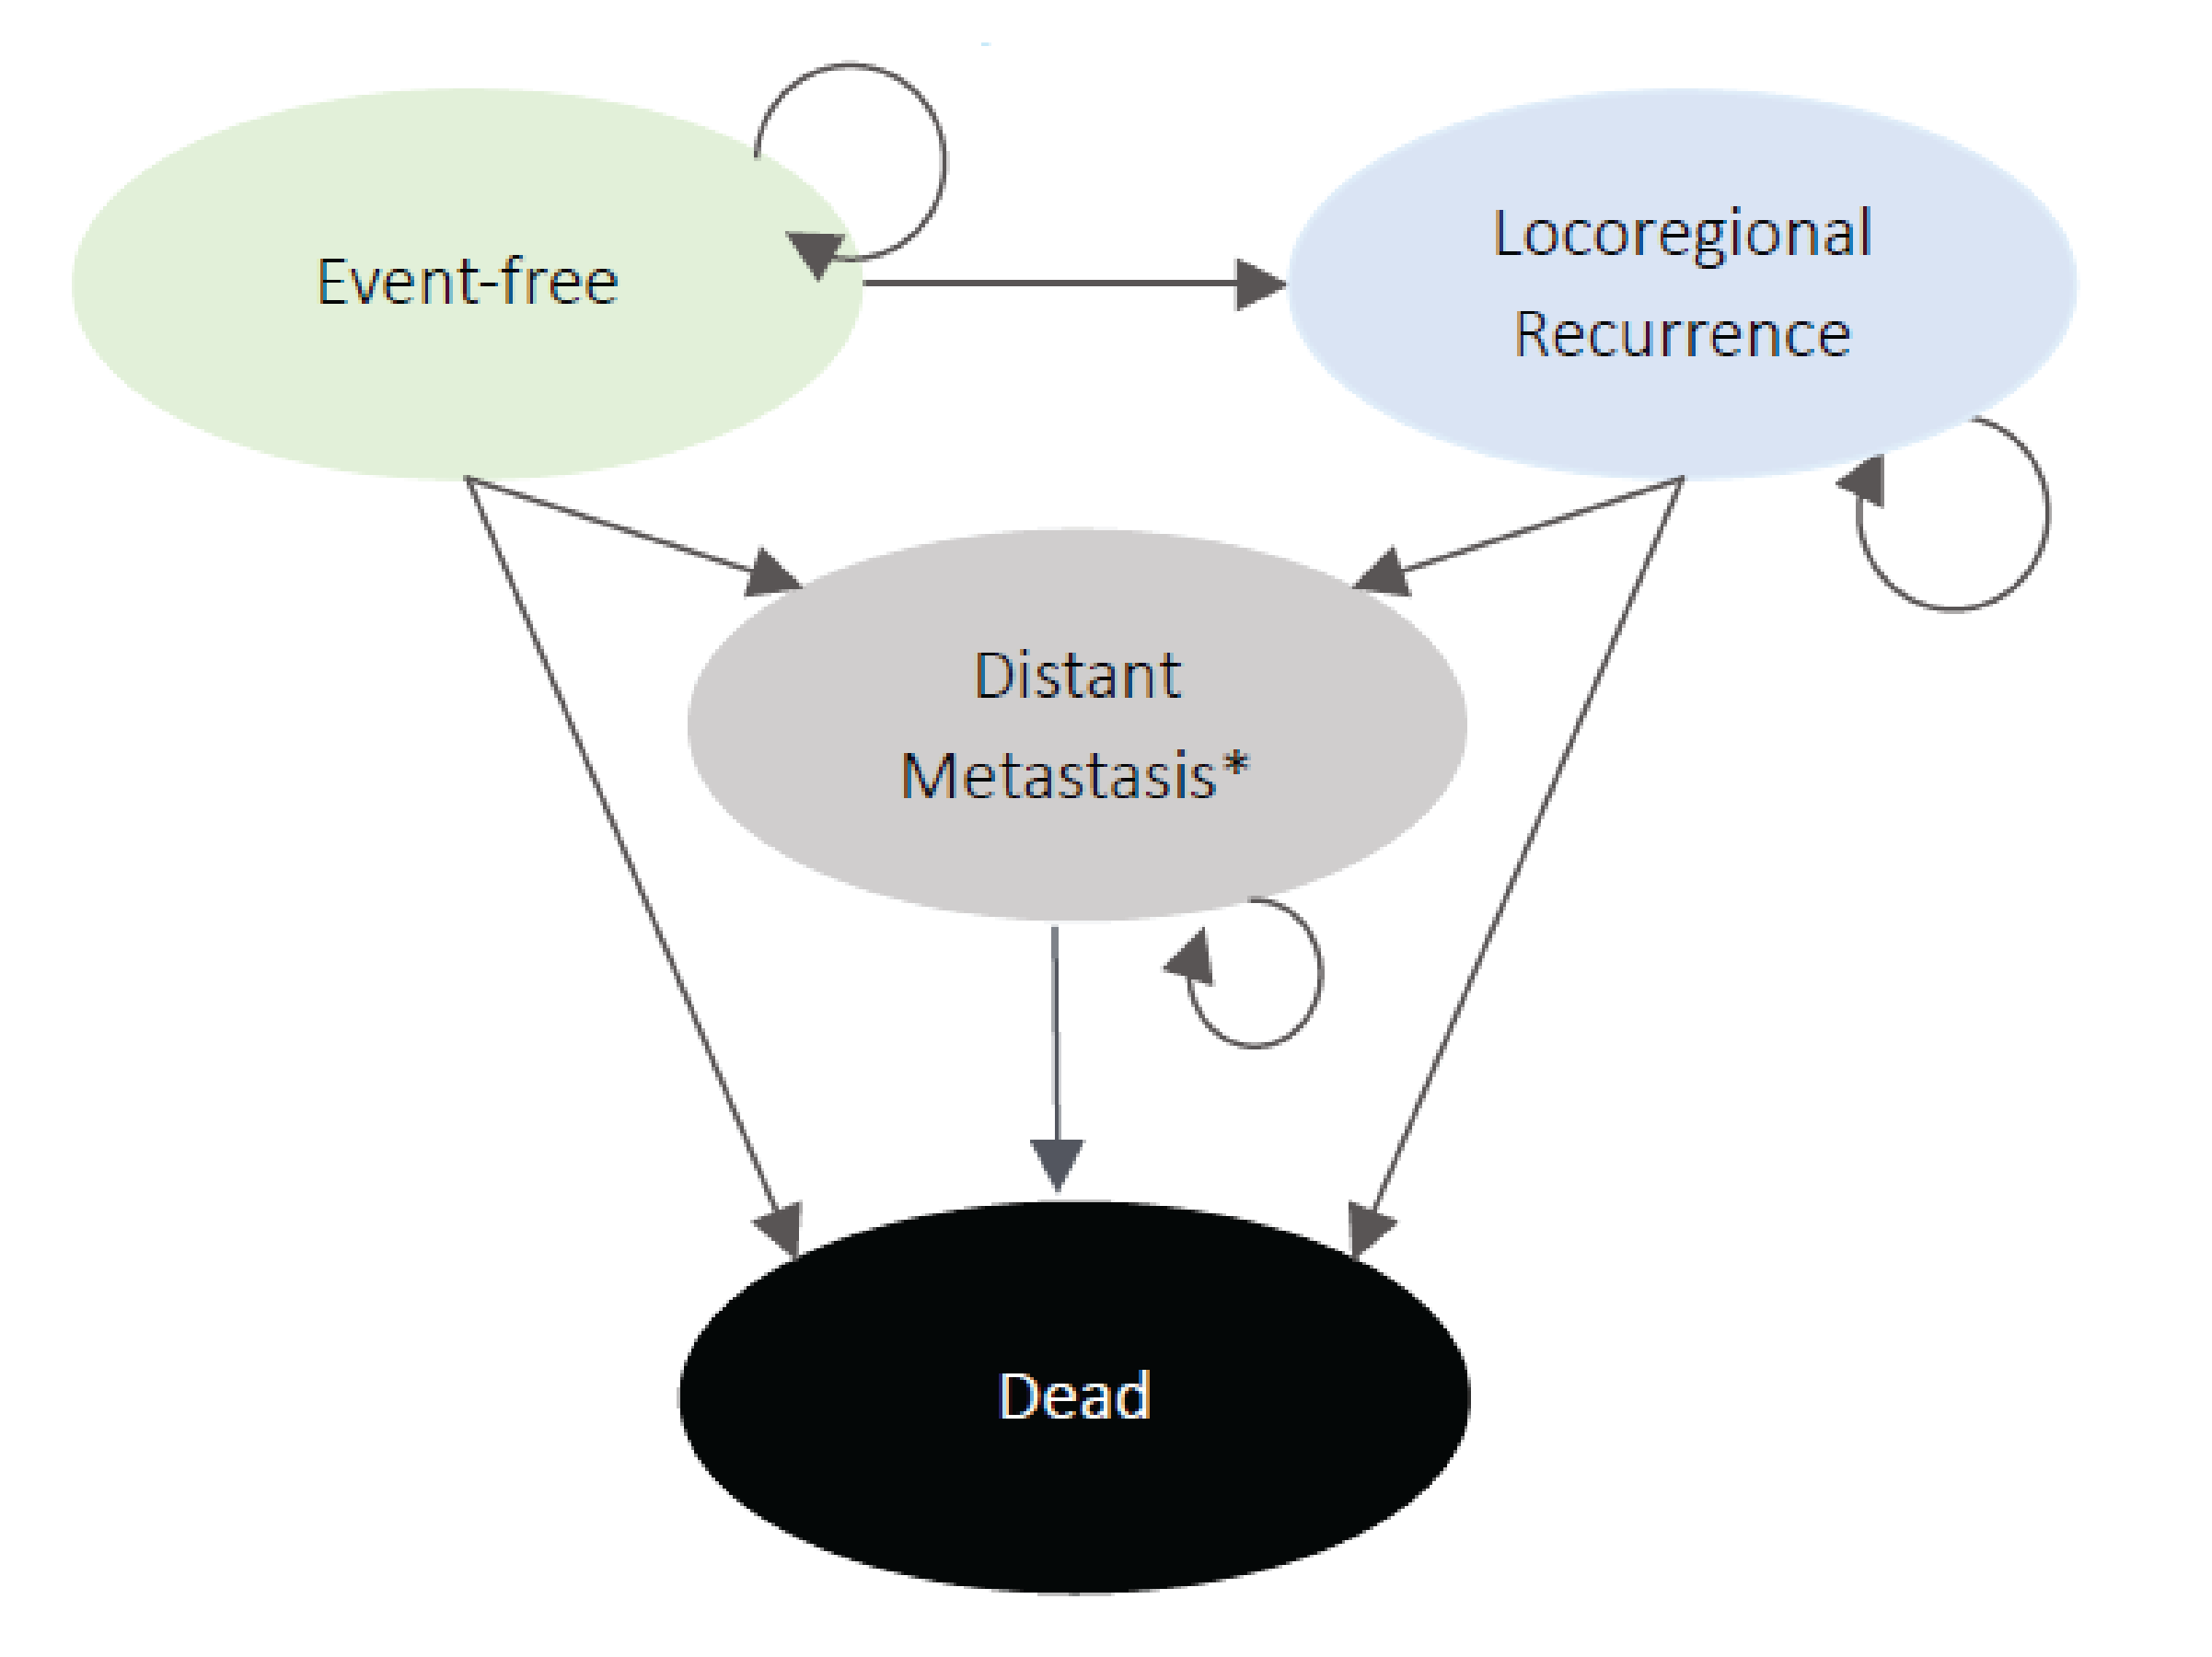 This figure outlines how patients move through the sponsor submitted model between event-free, locoregional recurrence, distant metastasis, and death.